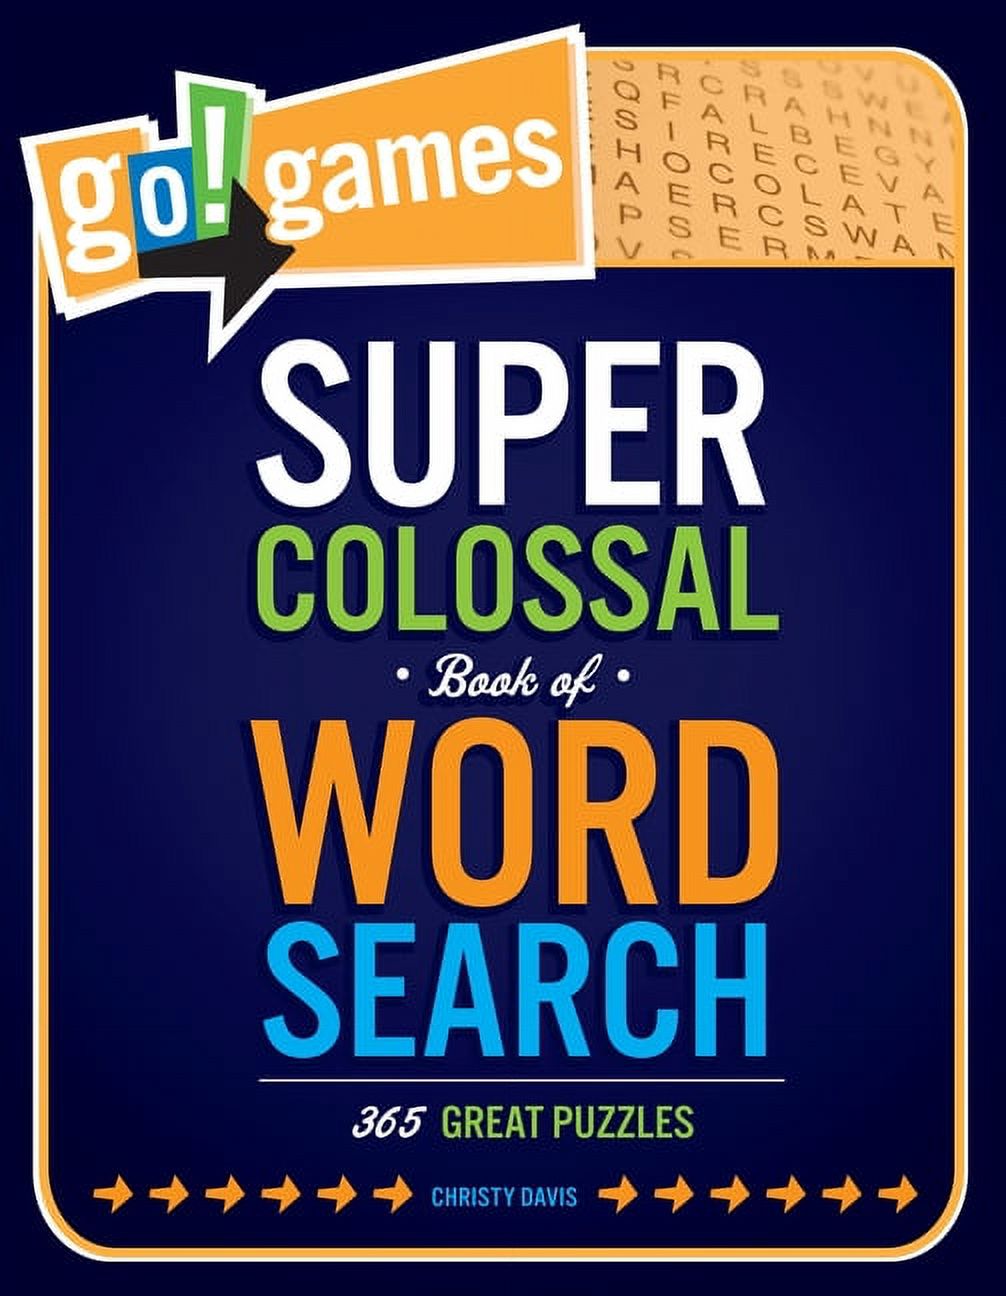 Go!games Go!games Super Colossal Book of Word Search: 365 Great Puzzles, (Paperback) - image 1 of 1